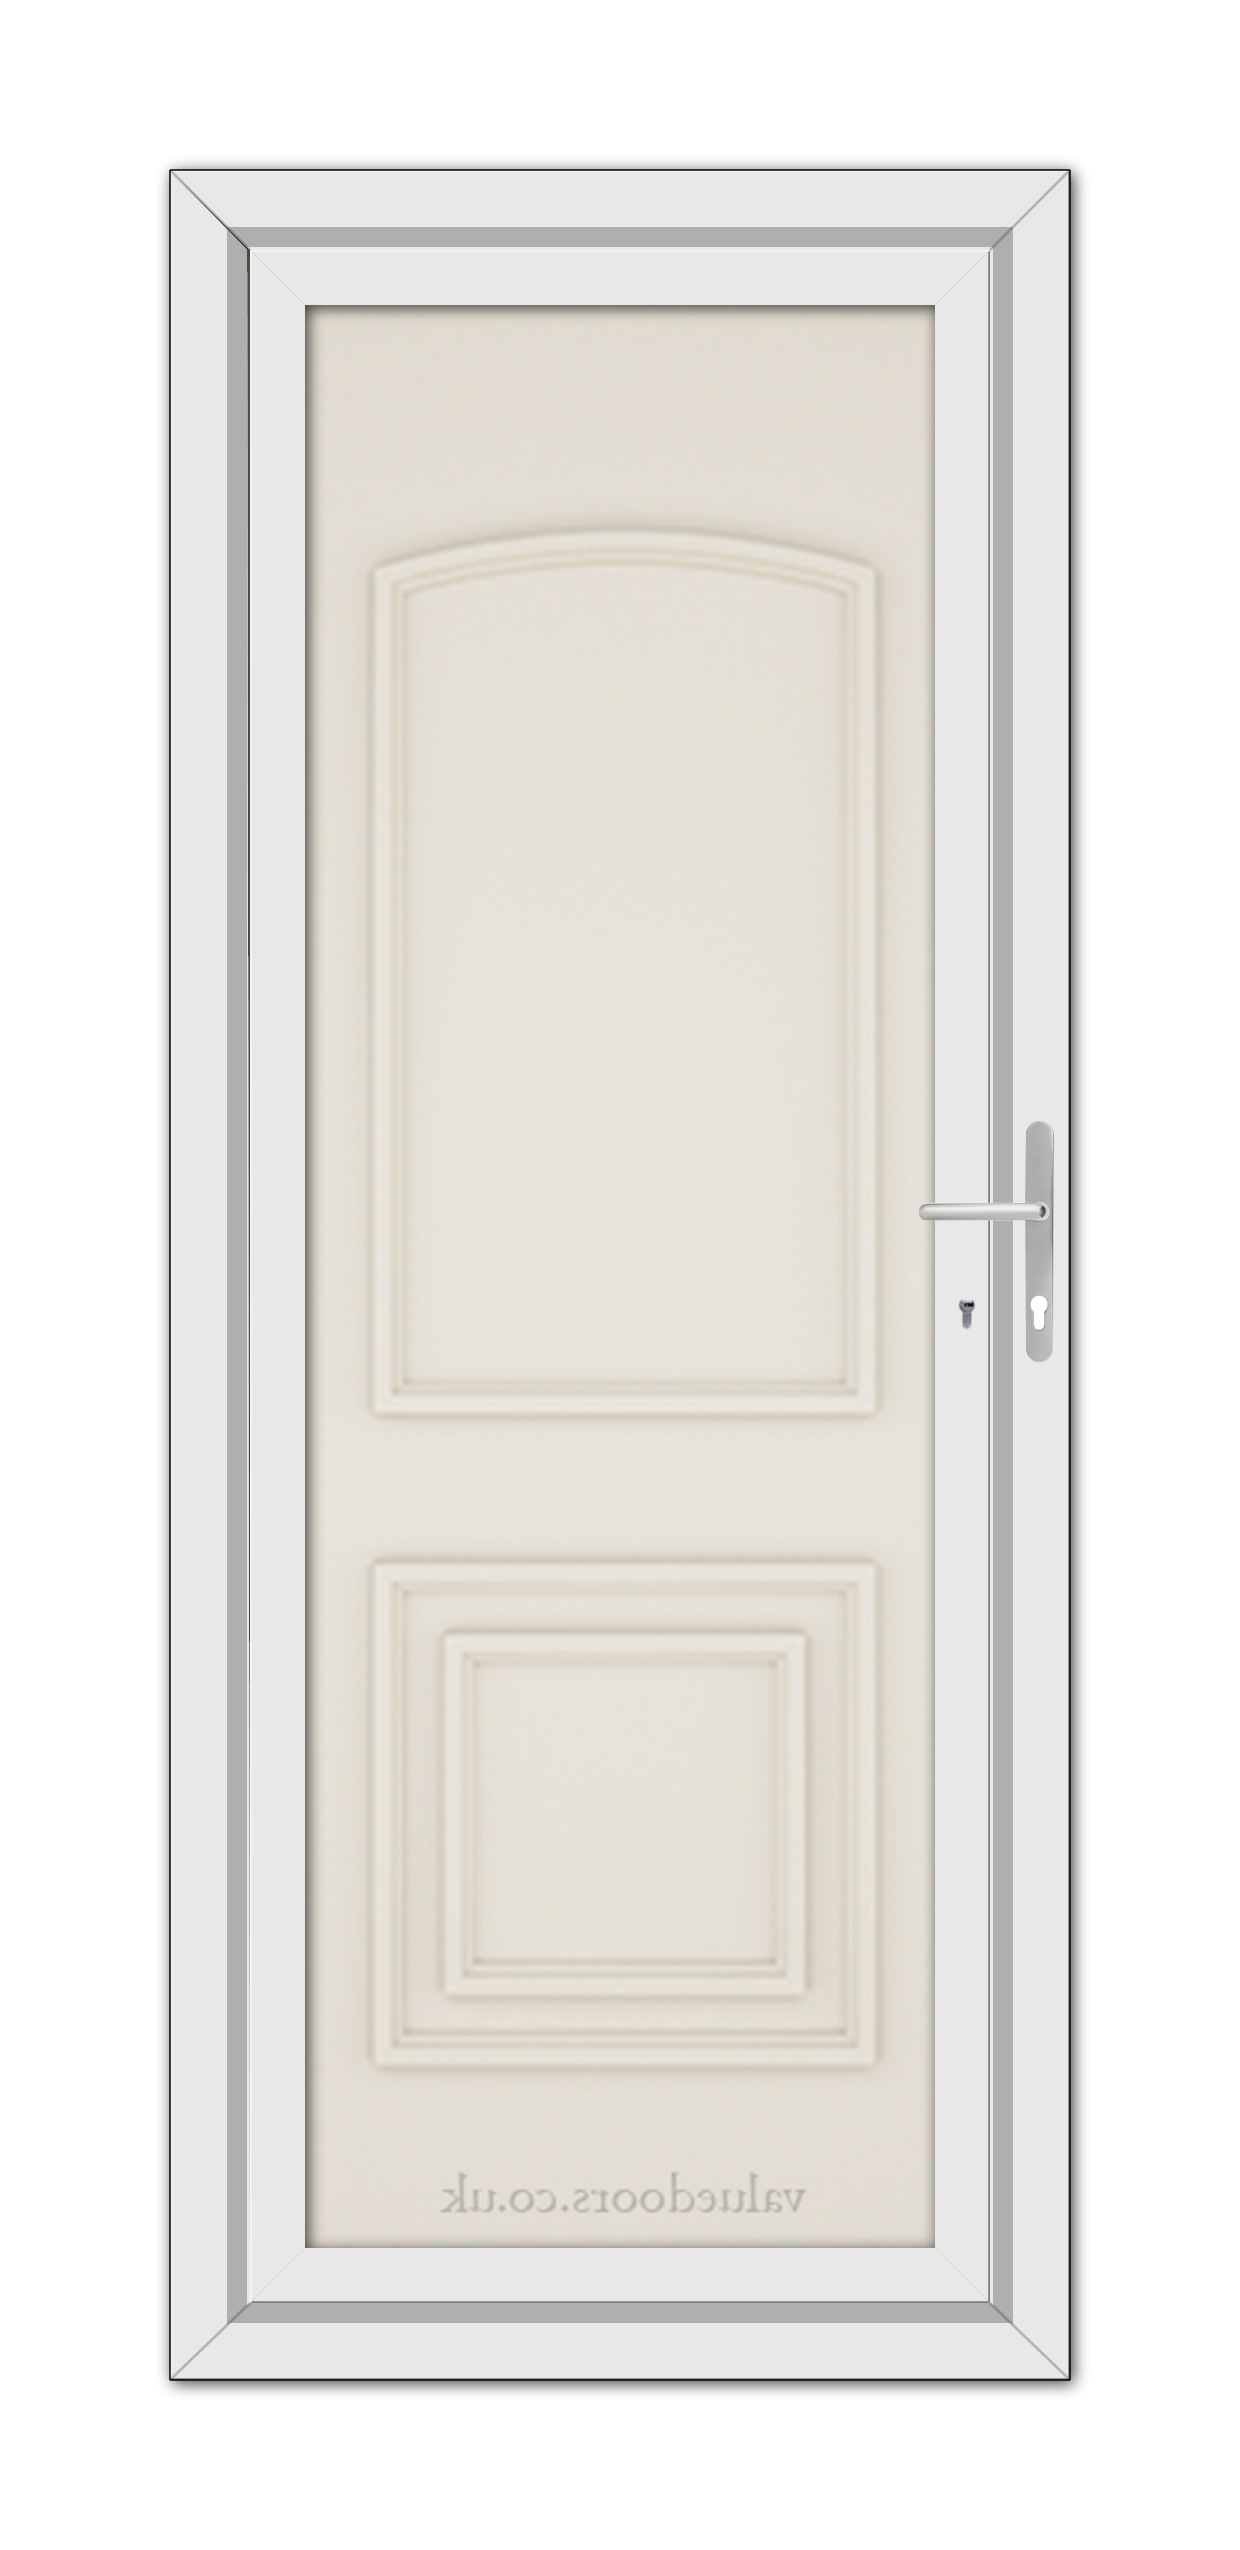 A vertical image of a closed Cream Balmoral Classic Solid uPVC Door with two panels, framed by a white door frame, and featuring a silver handle on the right side.